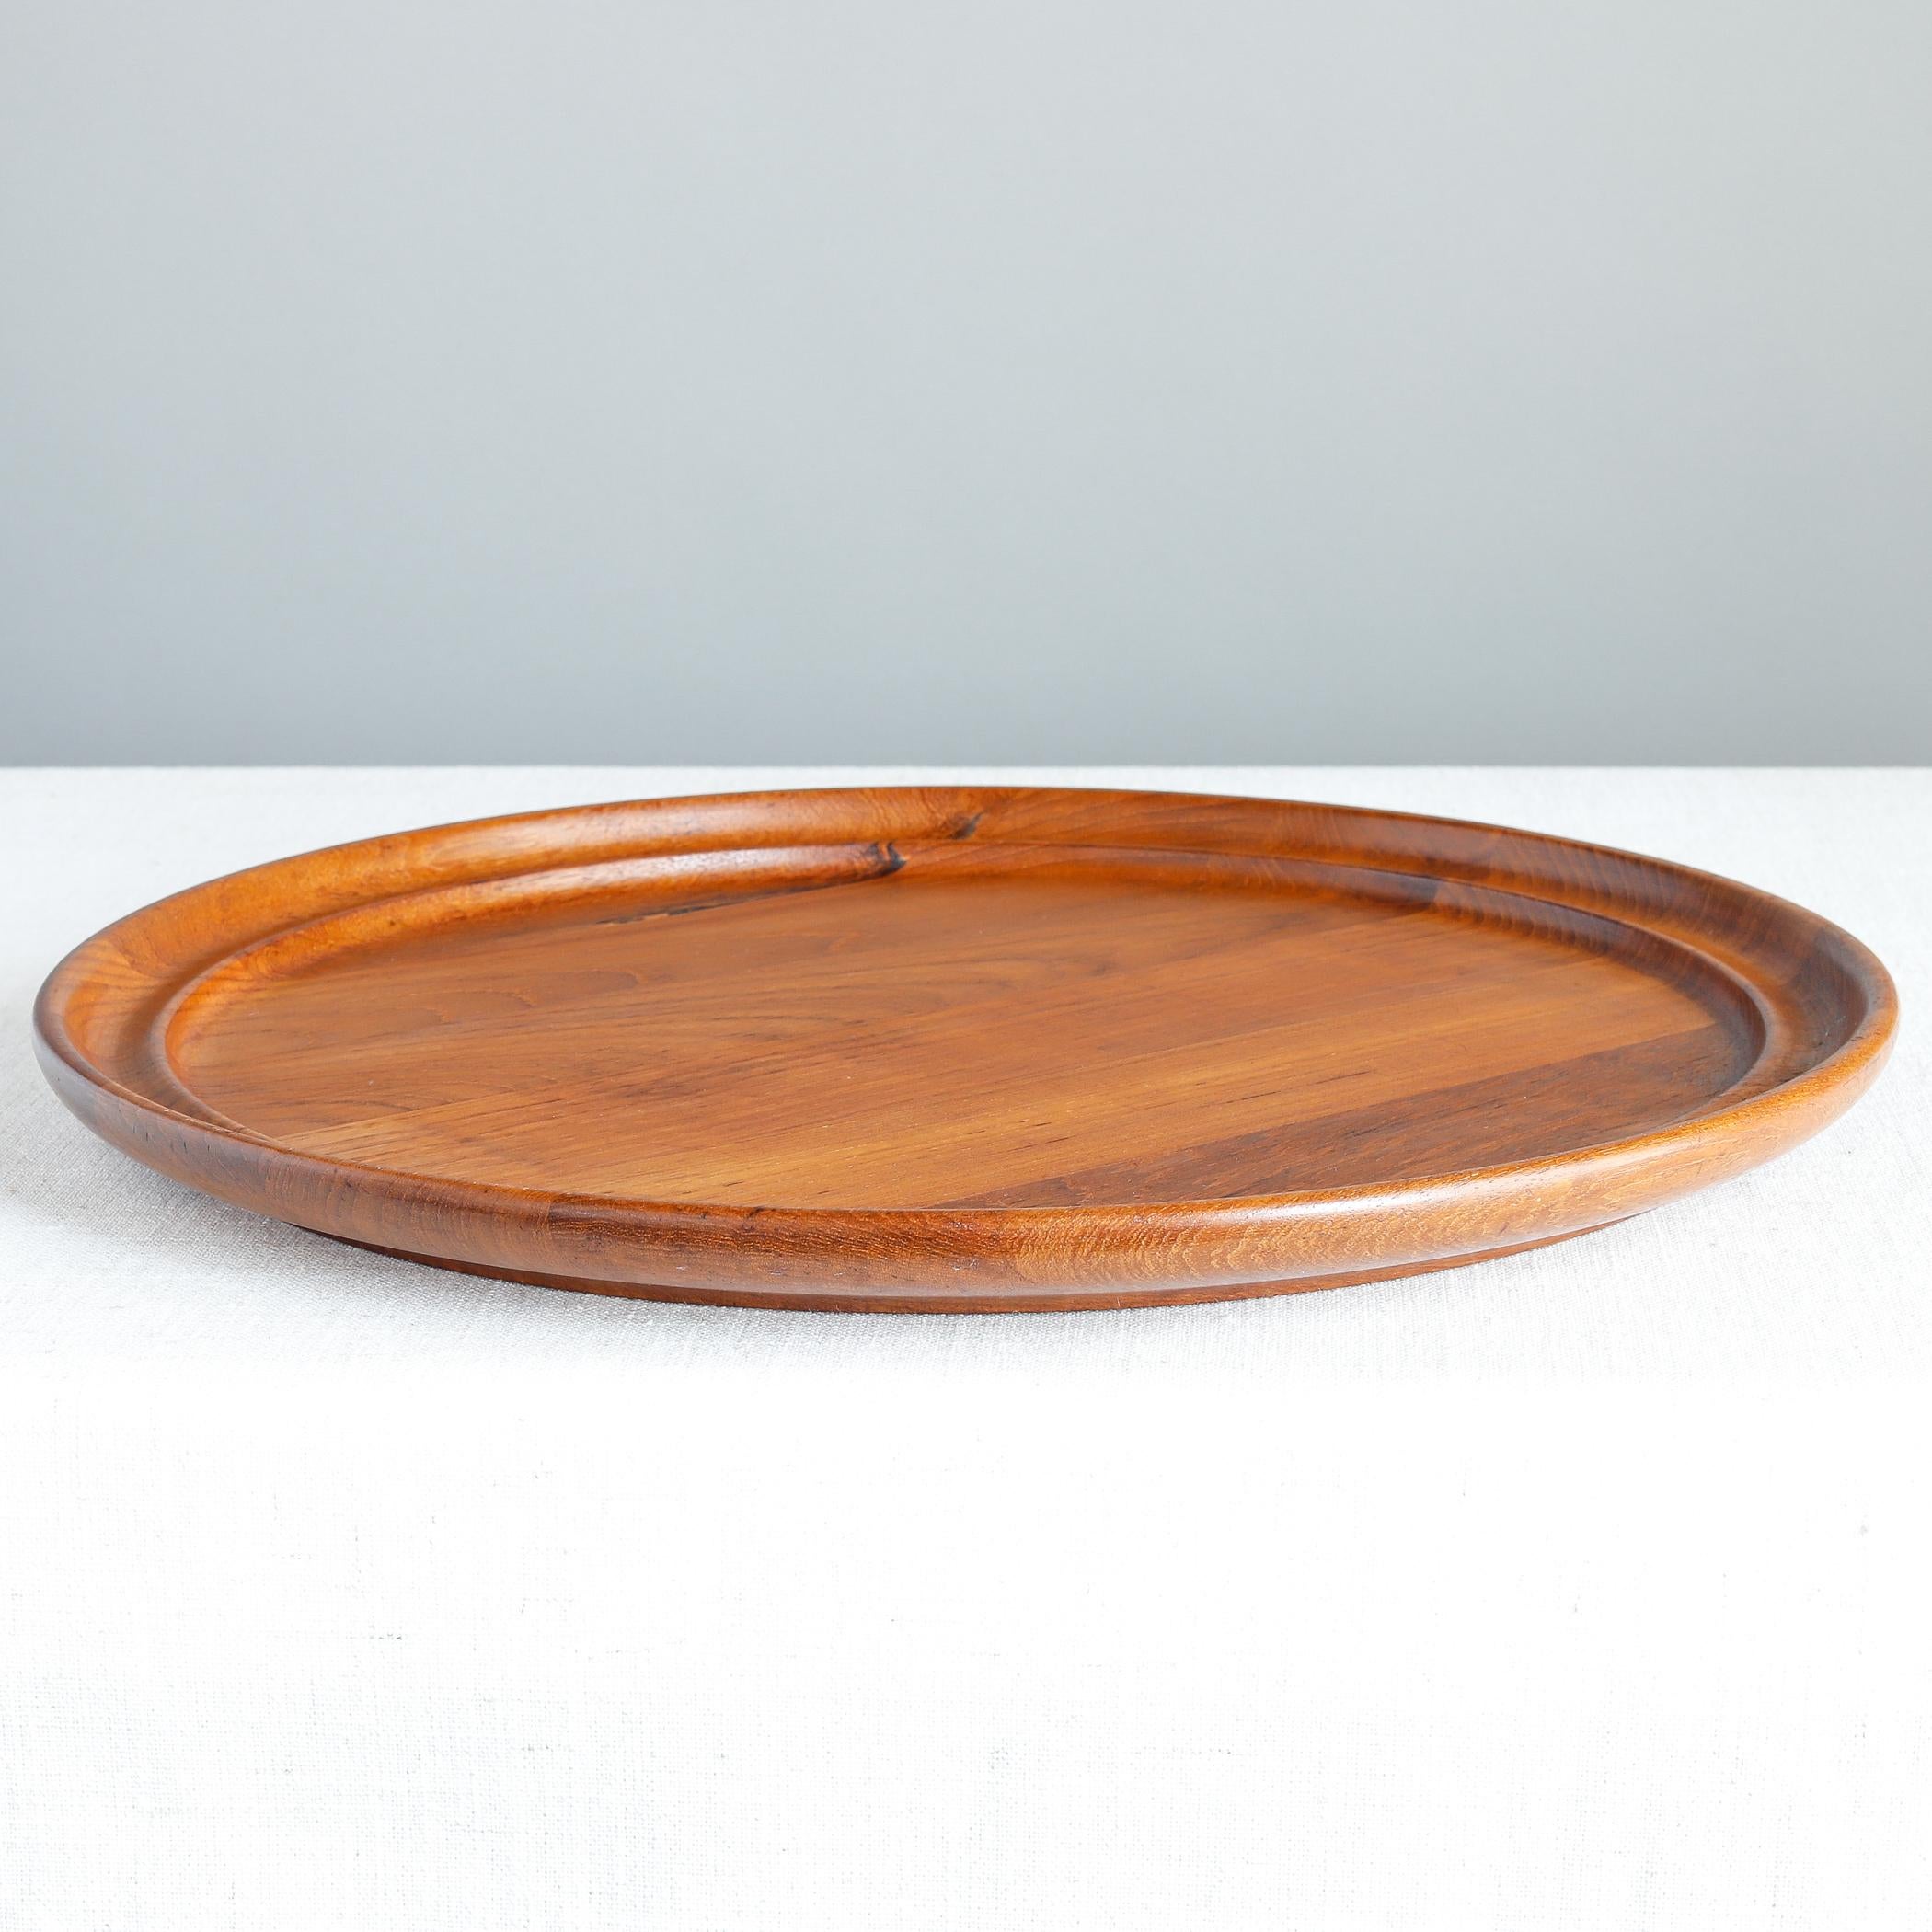 Staved teak tray designed by Henning Koppel for Danish retailer Georg Jensen. The round tray has a shaped rim, which was seen on all the pieces from this line. 

Provenance: this tray was owned by Bobbie de Marneffe of Massachusetts, a noted